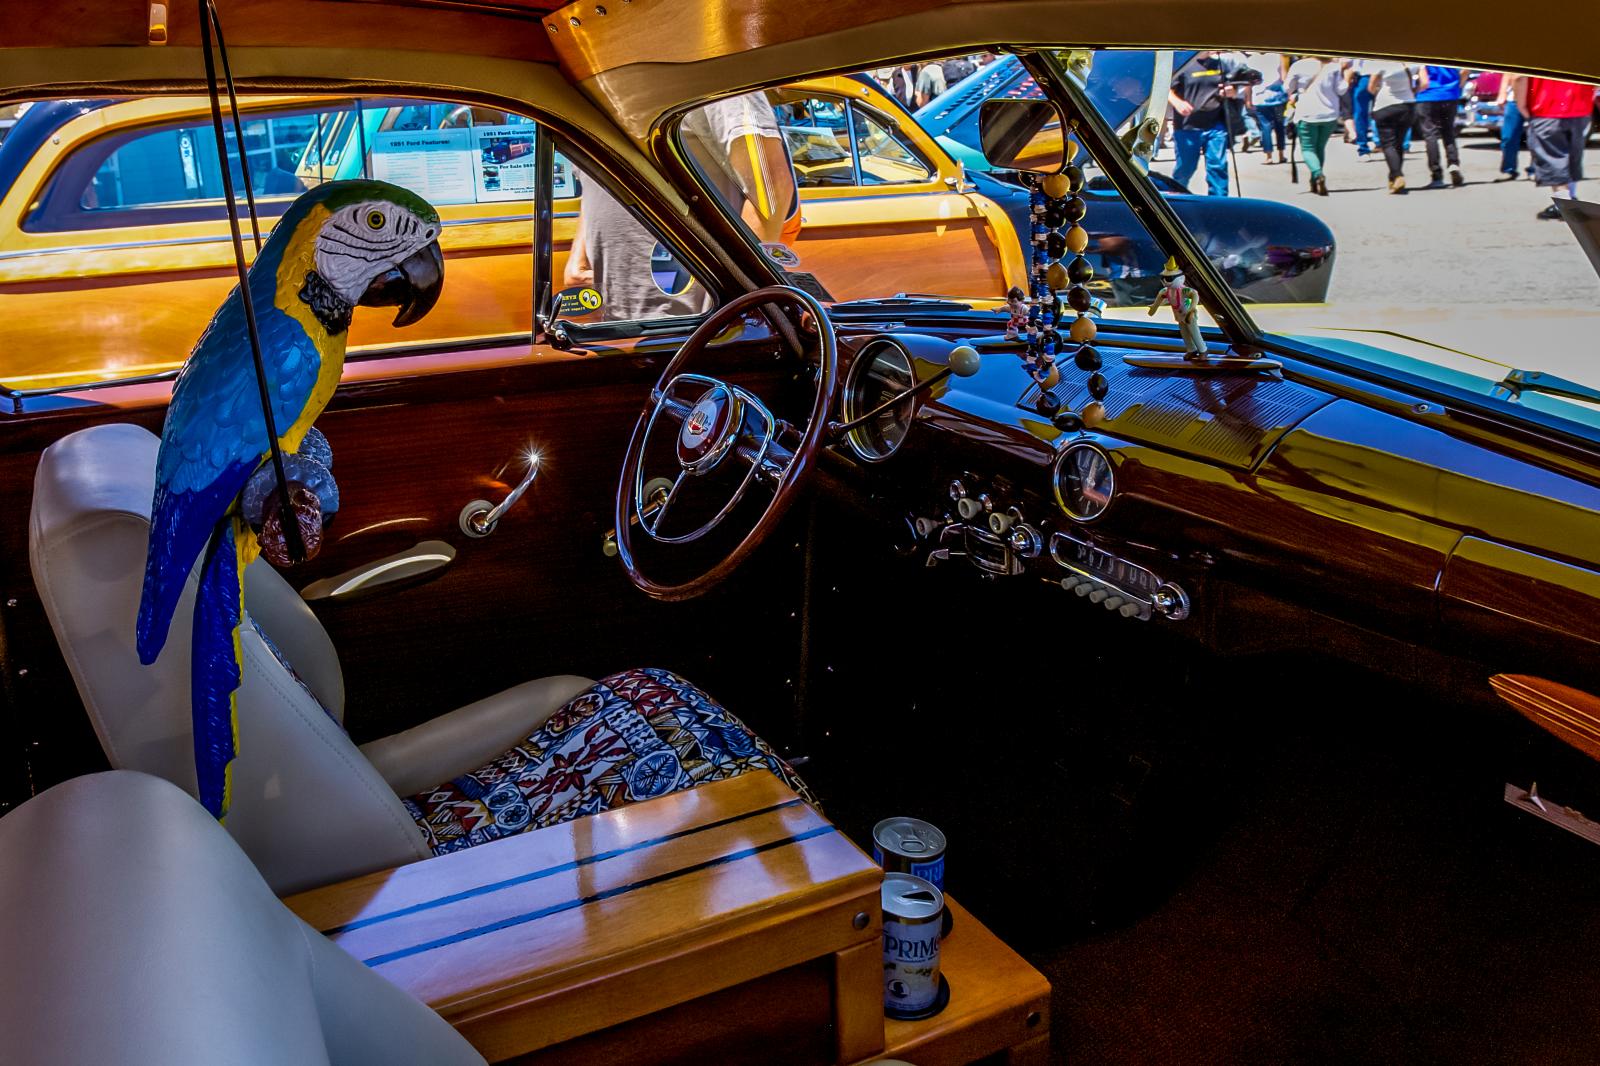 Parrot Interior of a Wood Car. | Buy this image